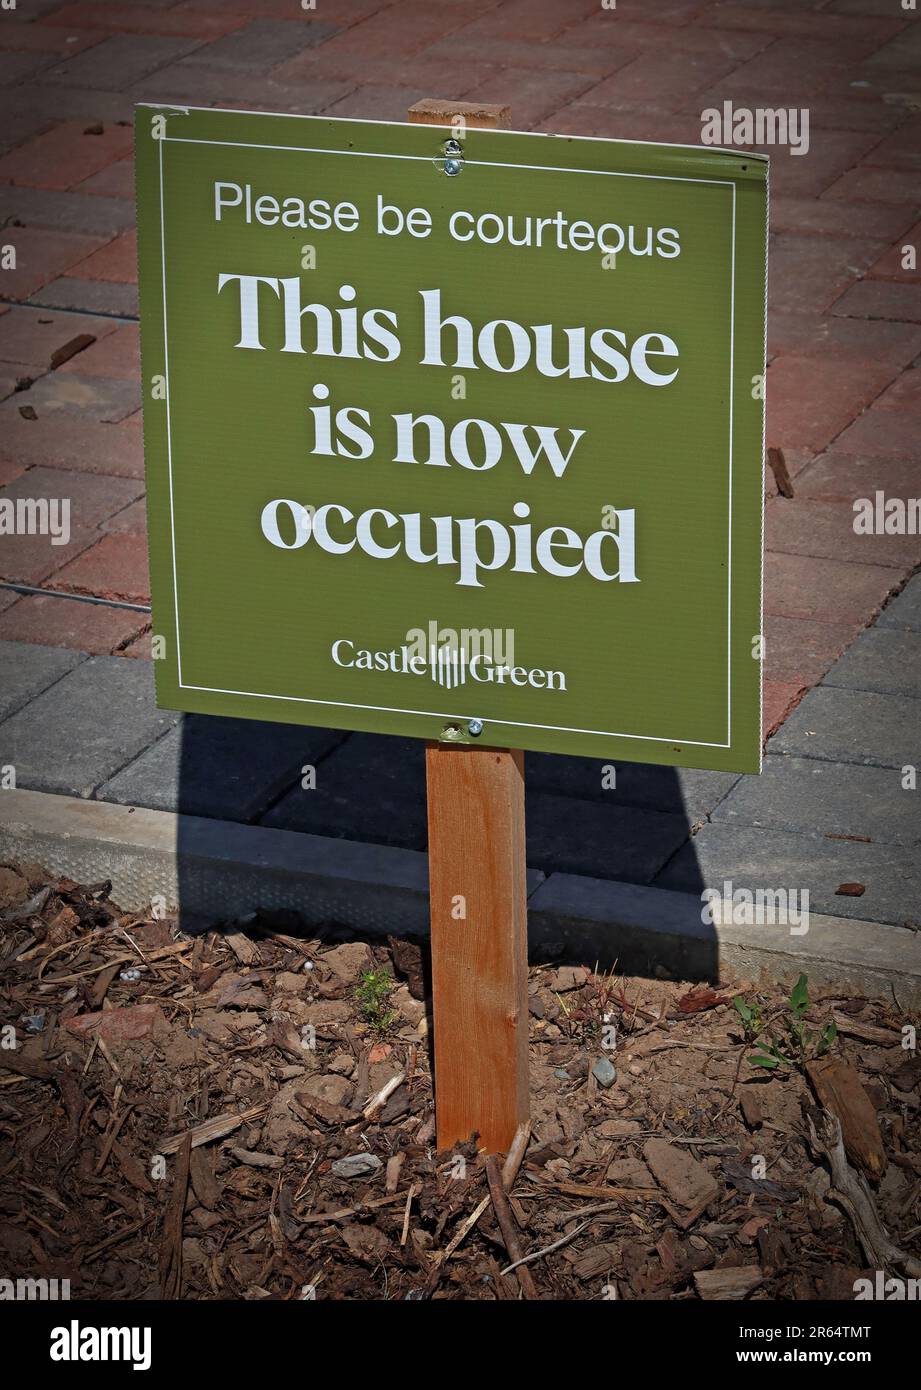 This house is now occupied, Castle Green, Please be courteous - Lingley Green,  Whittle Hall, Great Sankey, Warrington, Cheshire, England, UK, WA5 3LQ Stock Photo